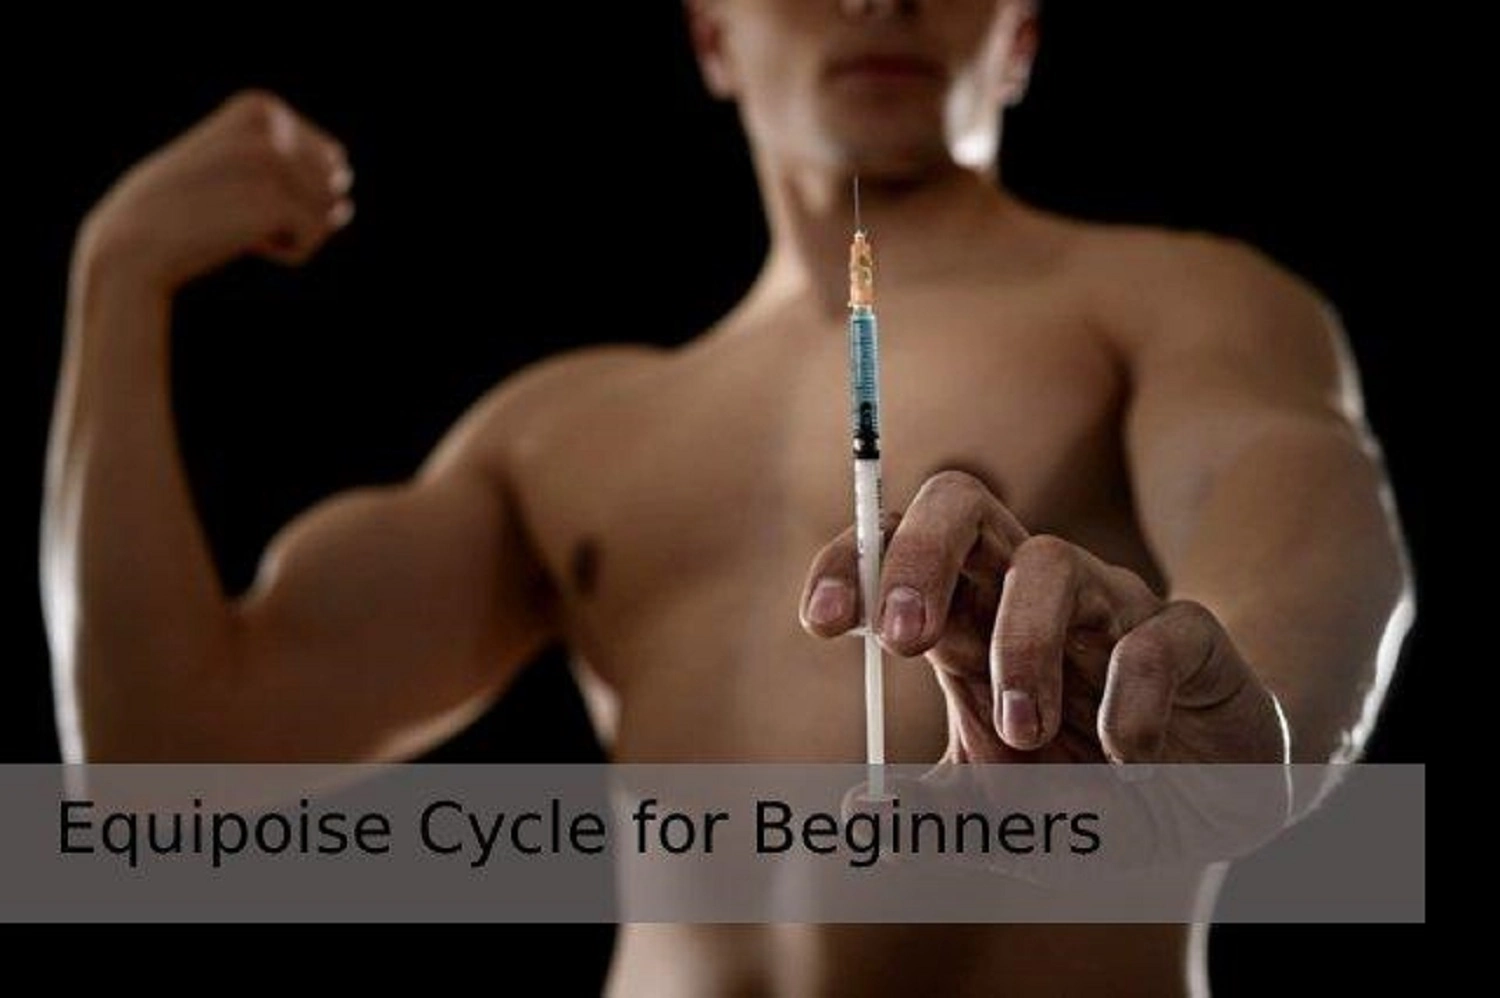 Equipoise cycle for beginners